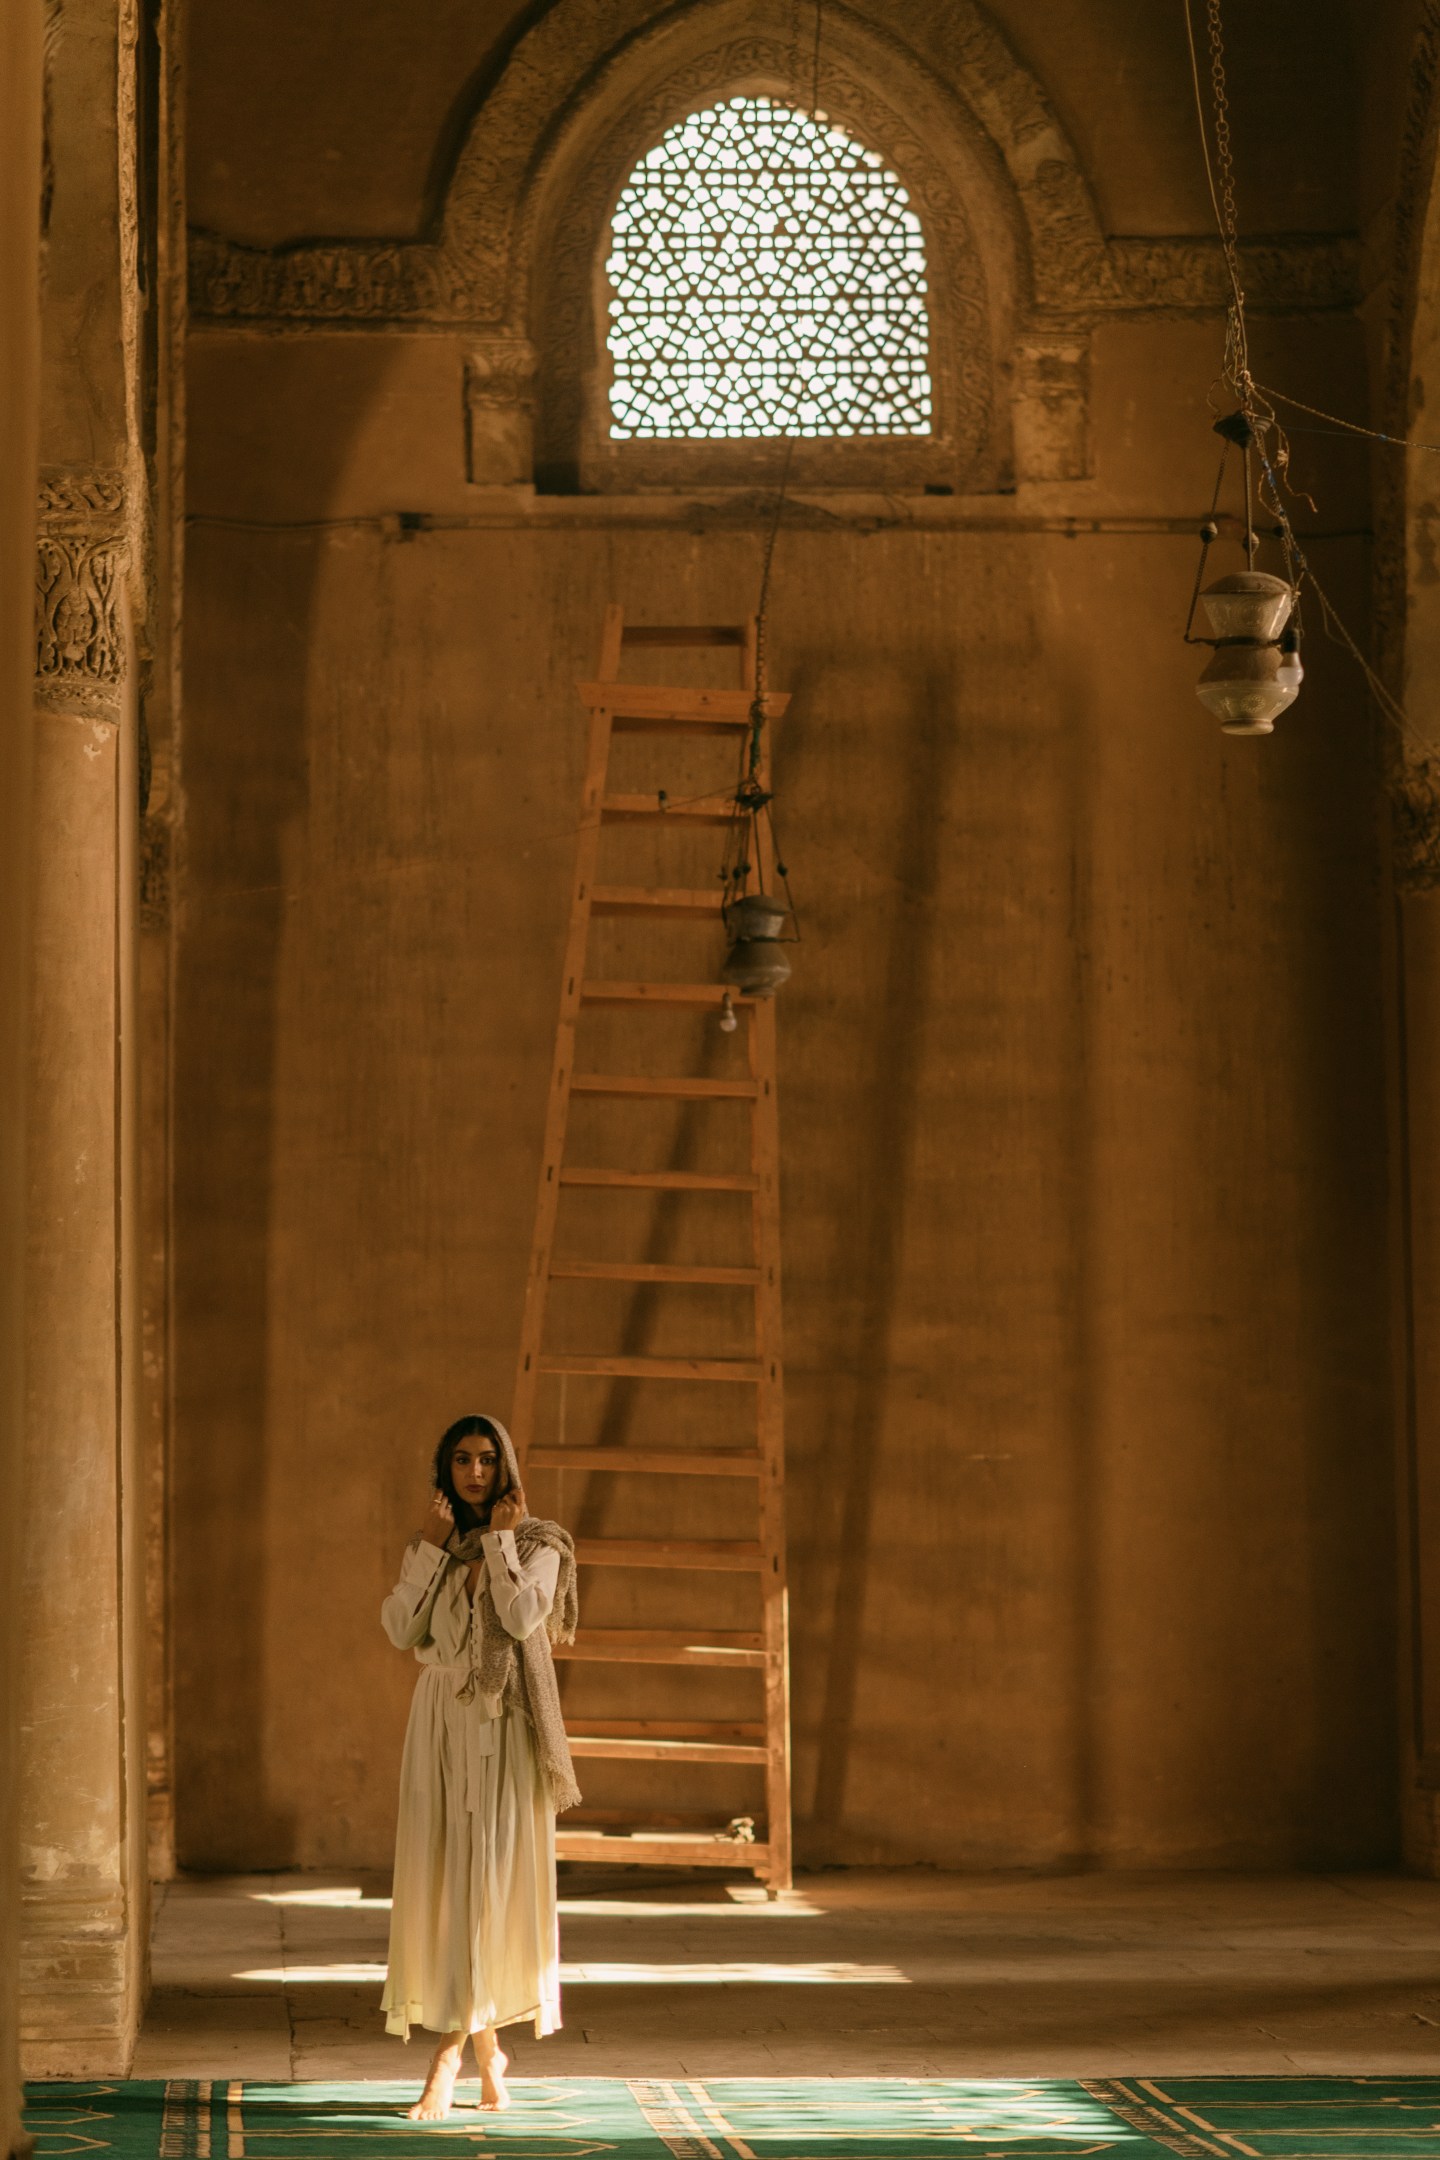 Lisa Homsy walks through Ibn Tulun Mosque in Cairo as the light leaks through the window